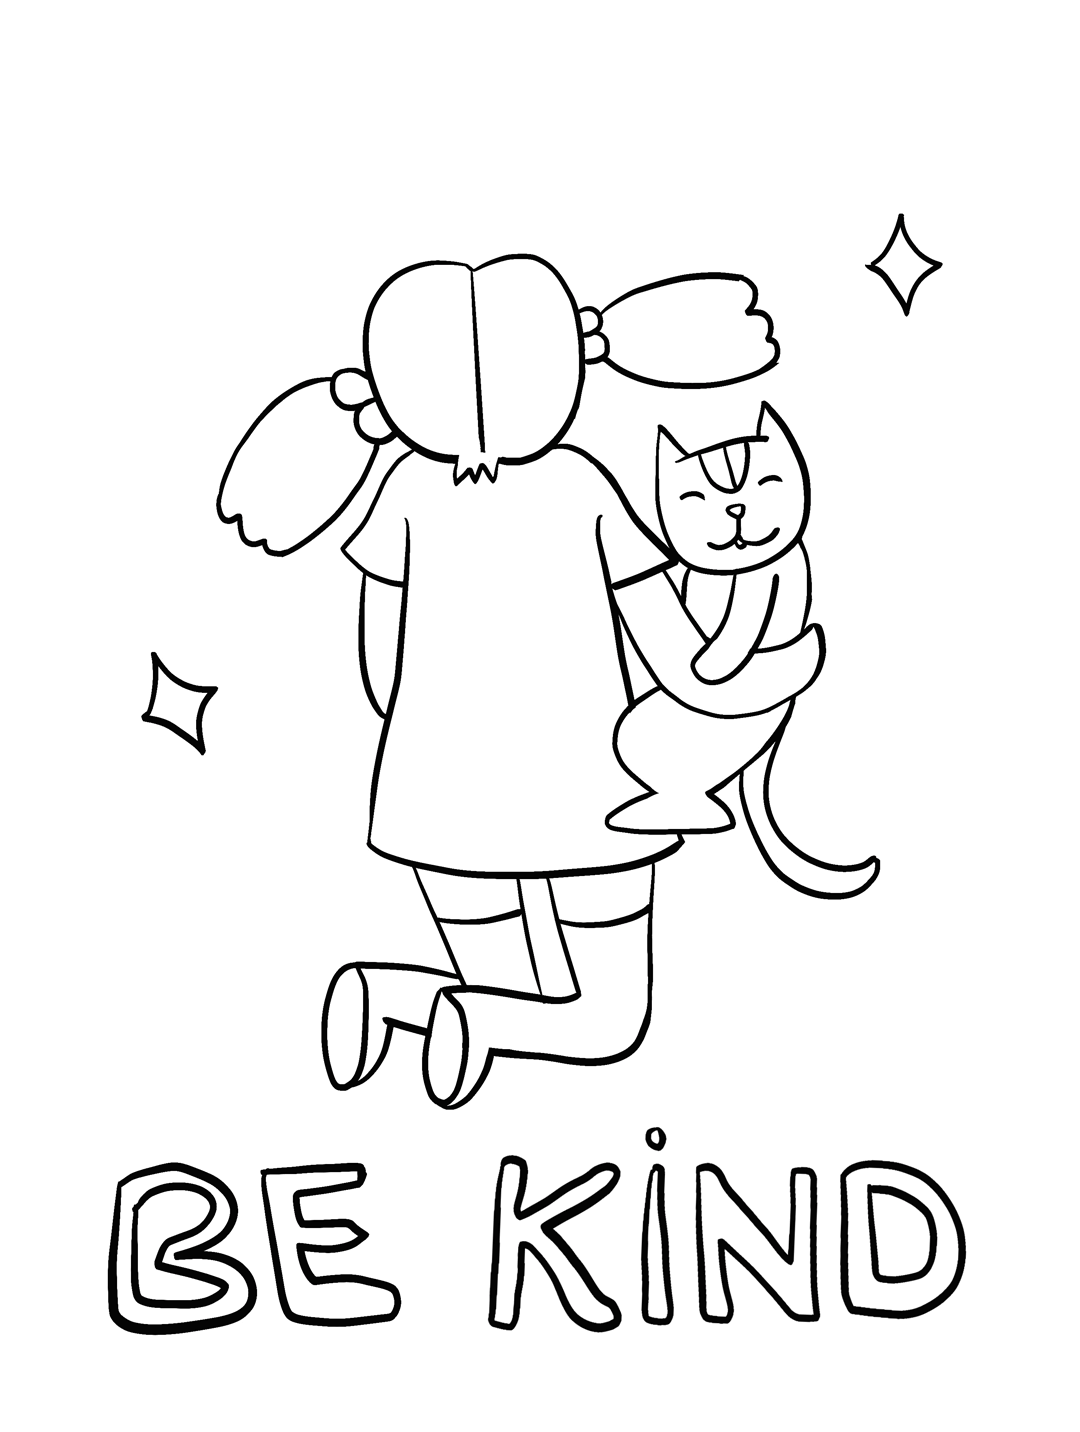 kindness is cool printable coloring pages